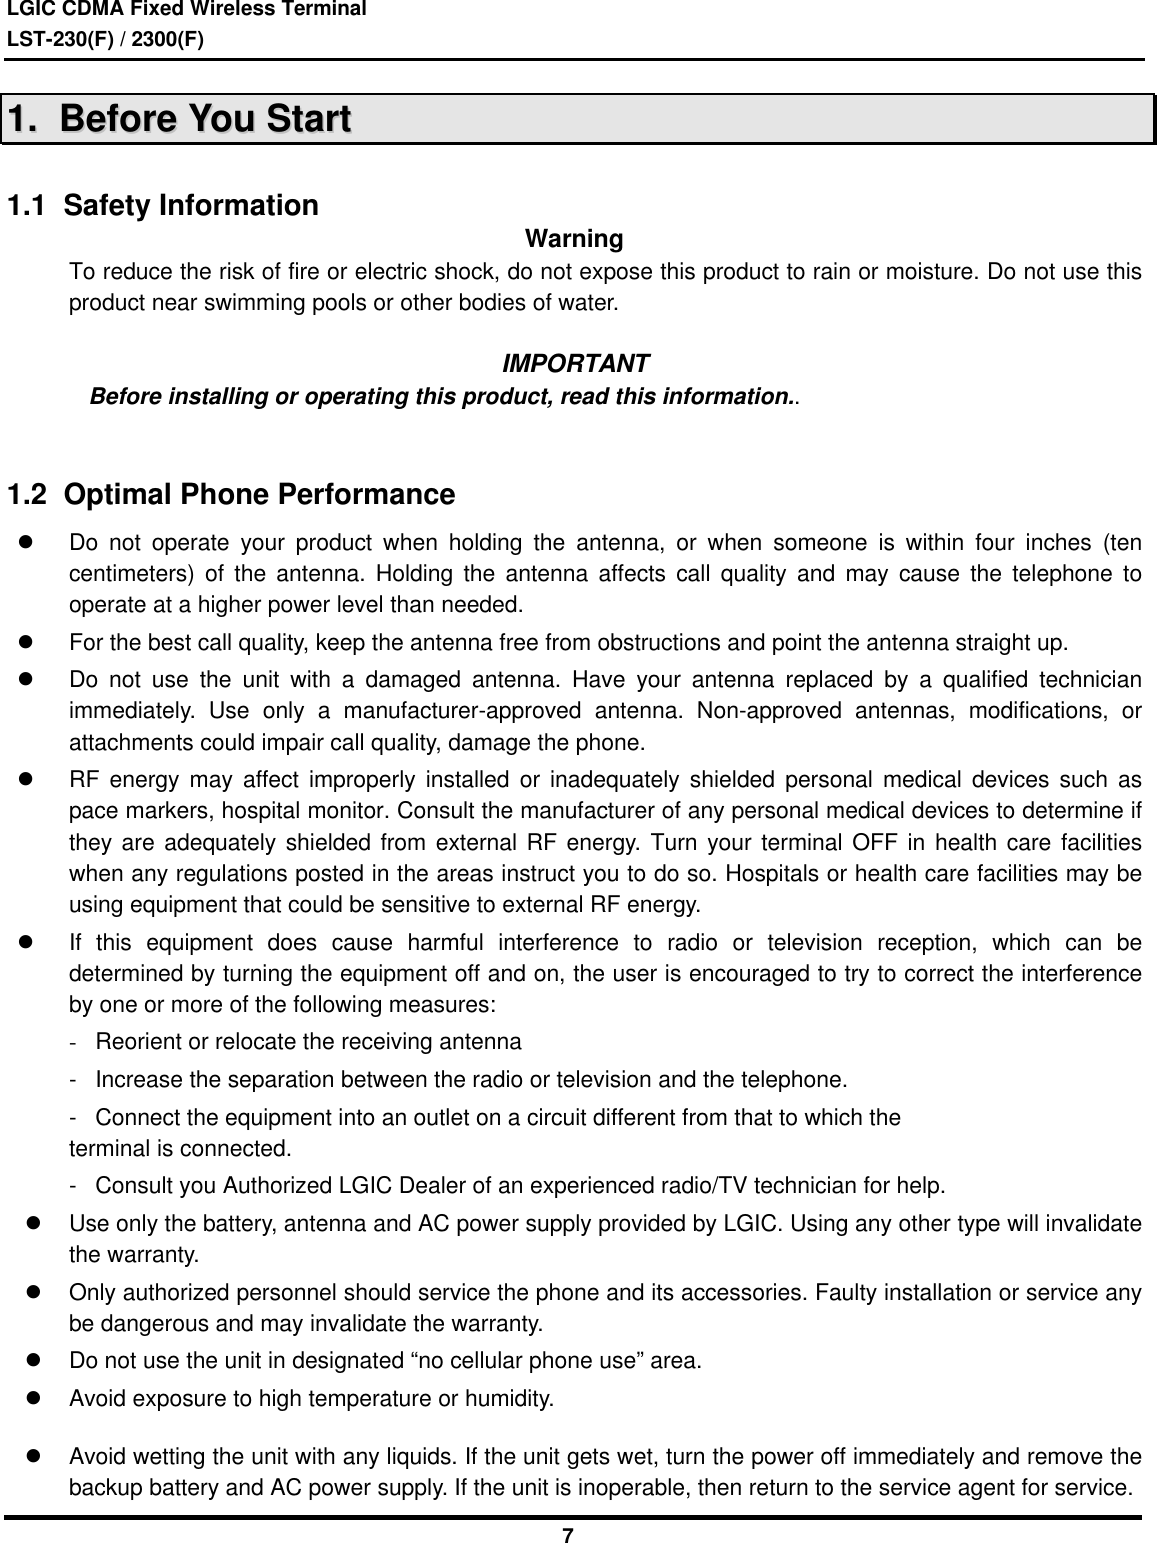 LGIC CDMA Fixed Wireless TerminalLST-230(F) / 2300(F)711..    BBeeffoorree  YYoouu  SSttaarrtt1.1  Safety Information WarningTo reduce the risk of fire or electric shock, do not expose this product to rain or moisture. Do not use thisproduct near swimming pools or other bodies of water.IMPORTANT   Before installing or operating this product, read this information..1.2  Optimal Phone Performancel Do not operate your product when holding the antenna, or when someone is within four inches (tencentimeters) of the antenna. Holding the antenna affects call quality and may cause the telephone tooperate at a higher power level than needed.l For the best call quality, keep the antenna free from obstructions and point the antenna straight up.l Do not use the unit with a damaged antenna. Have your antenna replaced by a qualified technicianimmediately. Use only a manufacturer-approved antenna. Non-approved antennas, modifications, orattachments could impair call quality, damage the phone.l RF energy may affect improperly installed or inadequately shielded personal medical devices such aspace markers, hospital monitor. Consult the manufacturer of any personal medical devices to determine ifthey are adequately shielded from external RF energy. Turn your terminal OFF in health care facilitieswhen any regulations posted in the areas instruct you to do so. Hospitals or health care facilities may beusing equipment that could be sensitive to external RF energy.l If this equipment does cause harmful interference to radio or television reception, which can bedetermined by turning the equipment off and on, the user is encouraged to try to correct the interferenceby one or more of the following measures: -Reorient or relocate the receiving antenna -Increase the separation between the radio or television and the telephone. -Connect the equipment into an outlet on a circuit different from that to which the terminal is connected. -Consult you Authorized LGIC Dealer of an experienced radio/TV technician for help.l Use only the battery, antenna and AC power supply provided by LGIC. Using any other type will invalidatethe warranty.l Only authorized personnel should service the phone and its accessories. Faulty installation or service anybe dangerous and may invalidate the warranty.l Do not use the unit in designated “no cellular phone use” area.l Avoid exposure to high temperature or humidity.l Avoid wetting the unit with any liquids. If the unit gets wet, turn the power off immediately and remove thebackup battery and AC power supply. If the unit is inoperable, then return to the service agent for service.